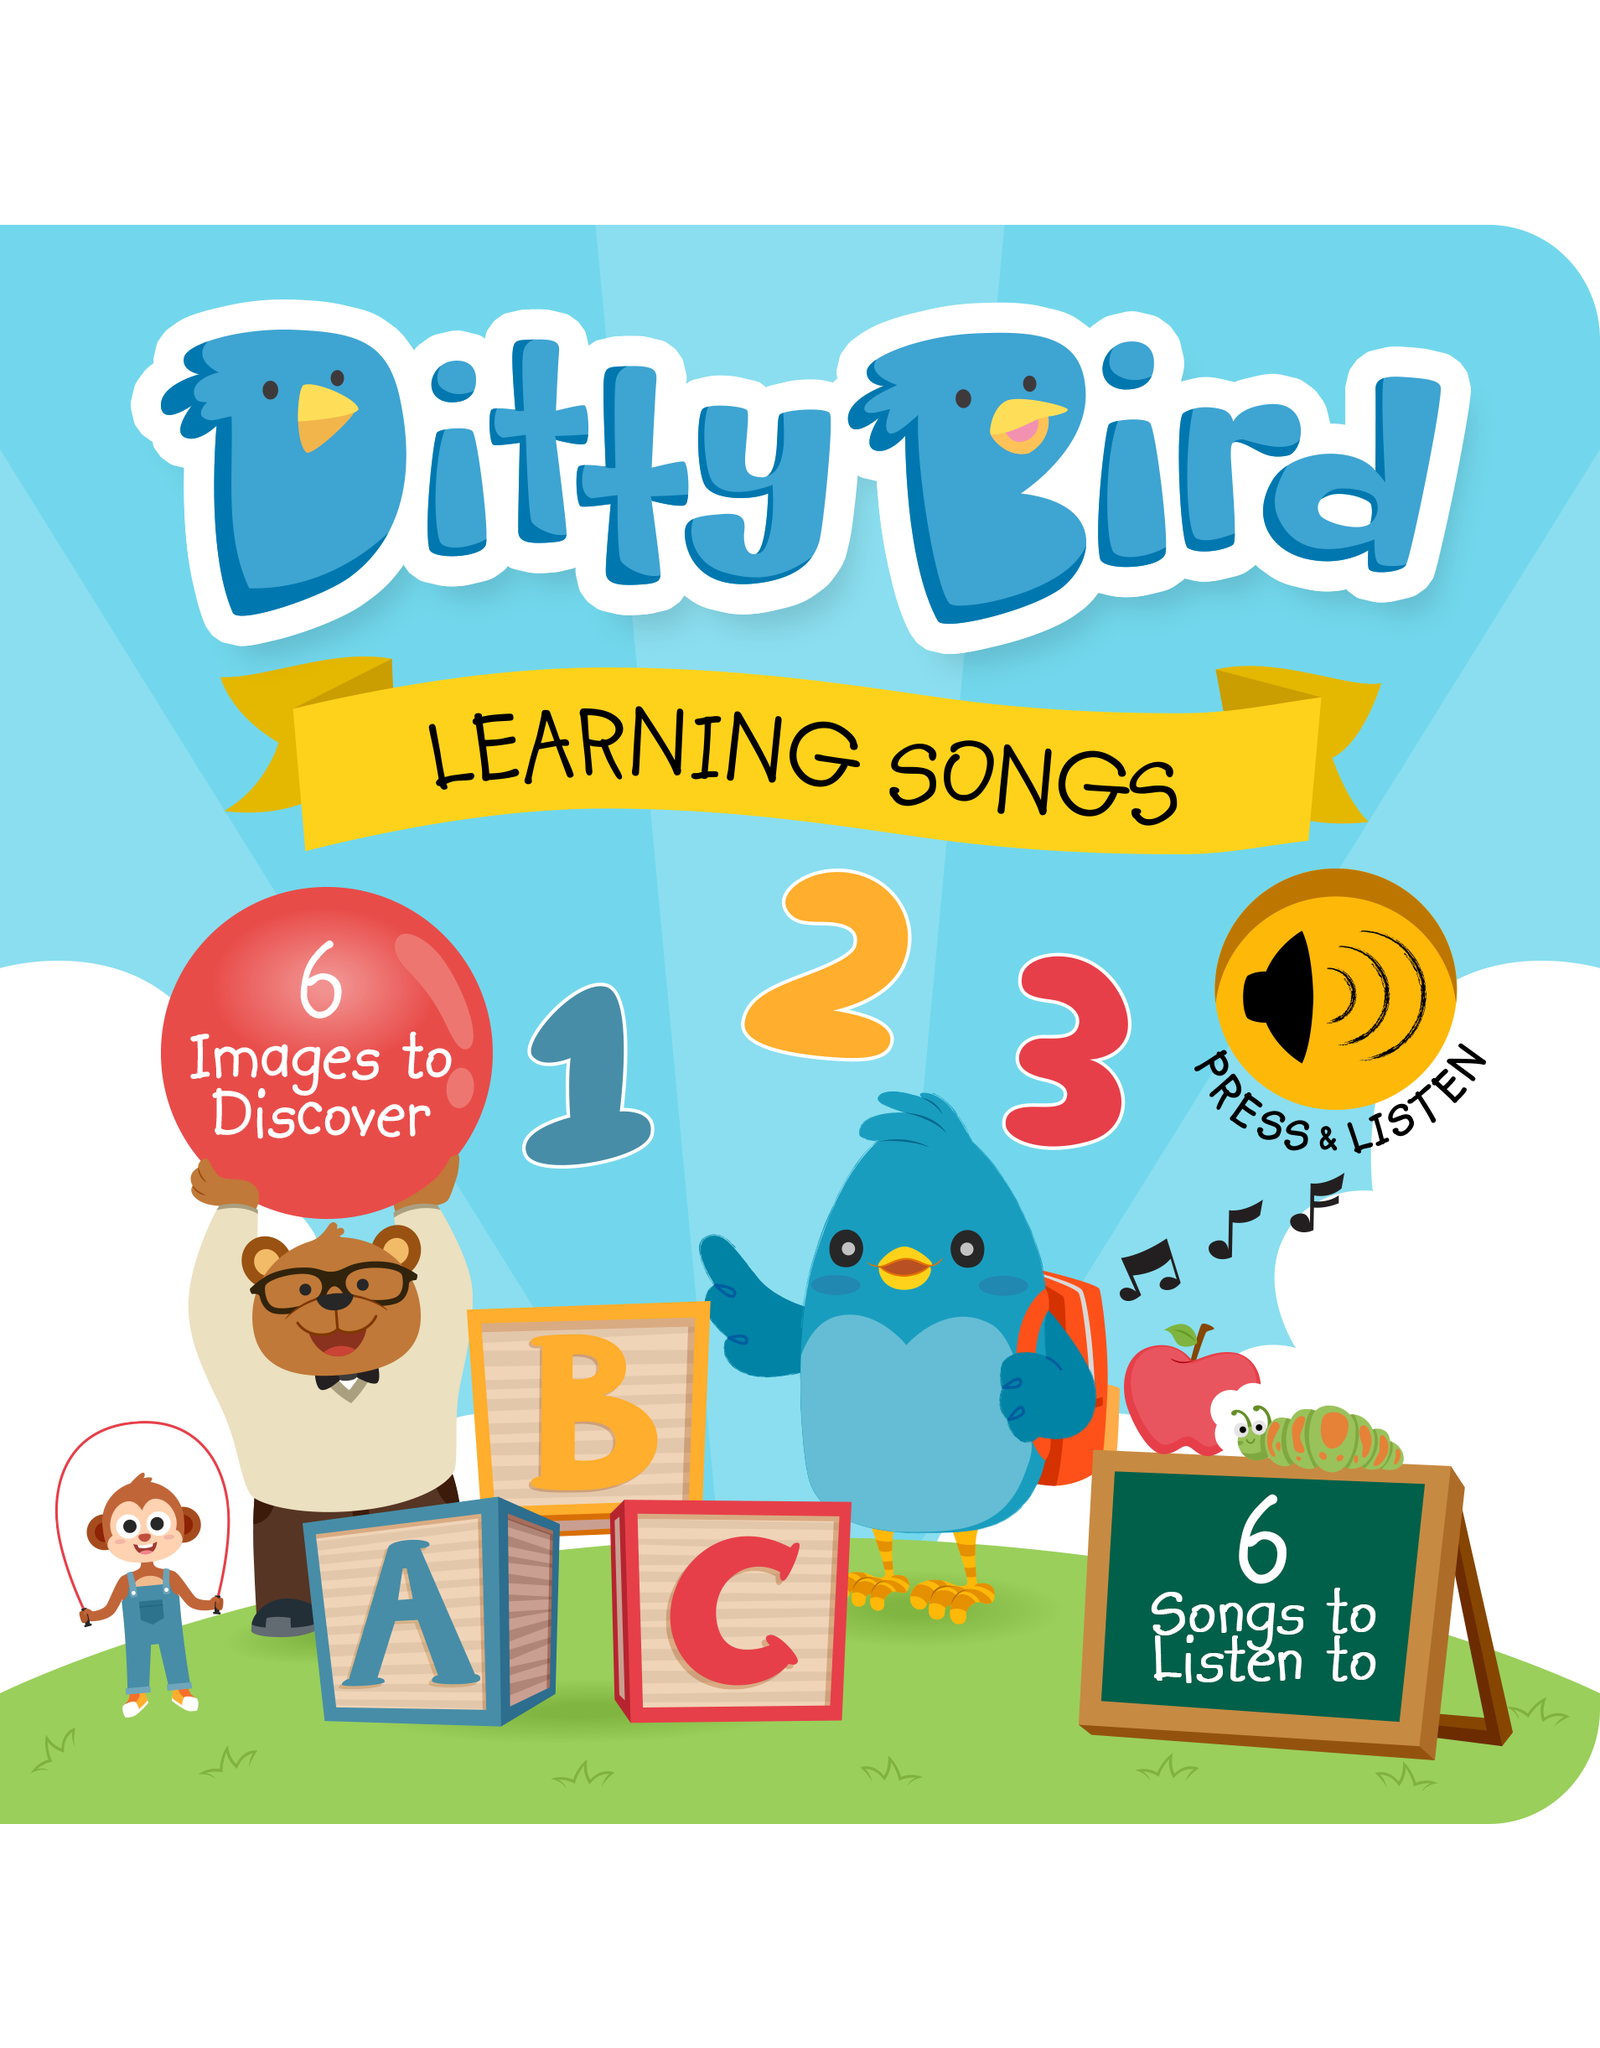 Ditty Bird Ditty Bird Baby Sound Book: Learning Songs